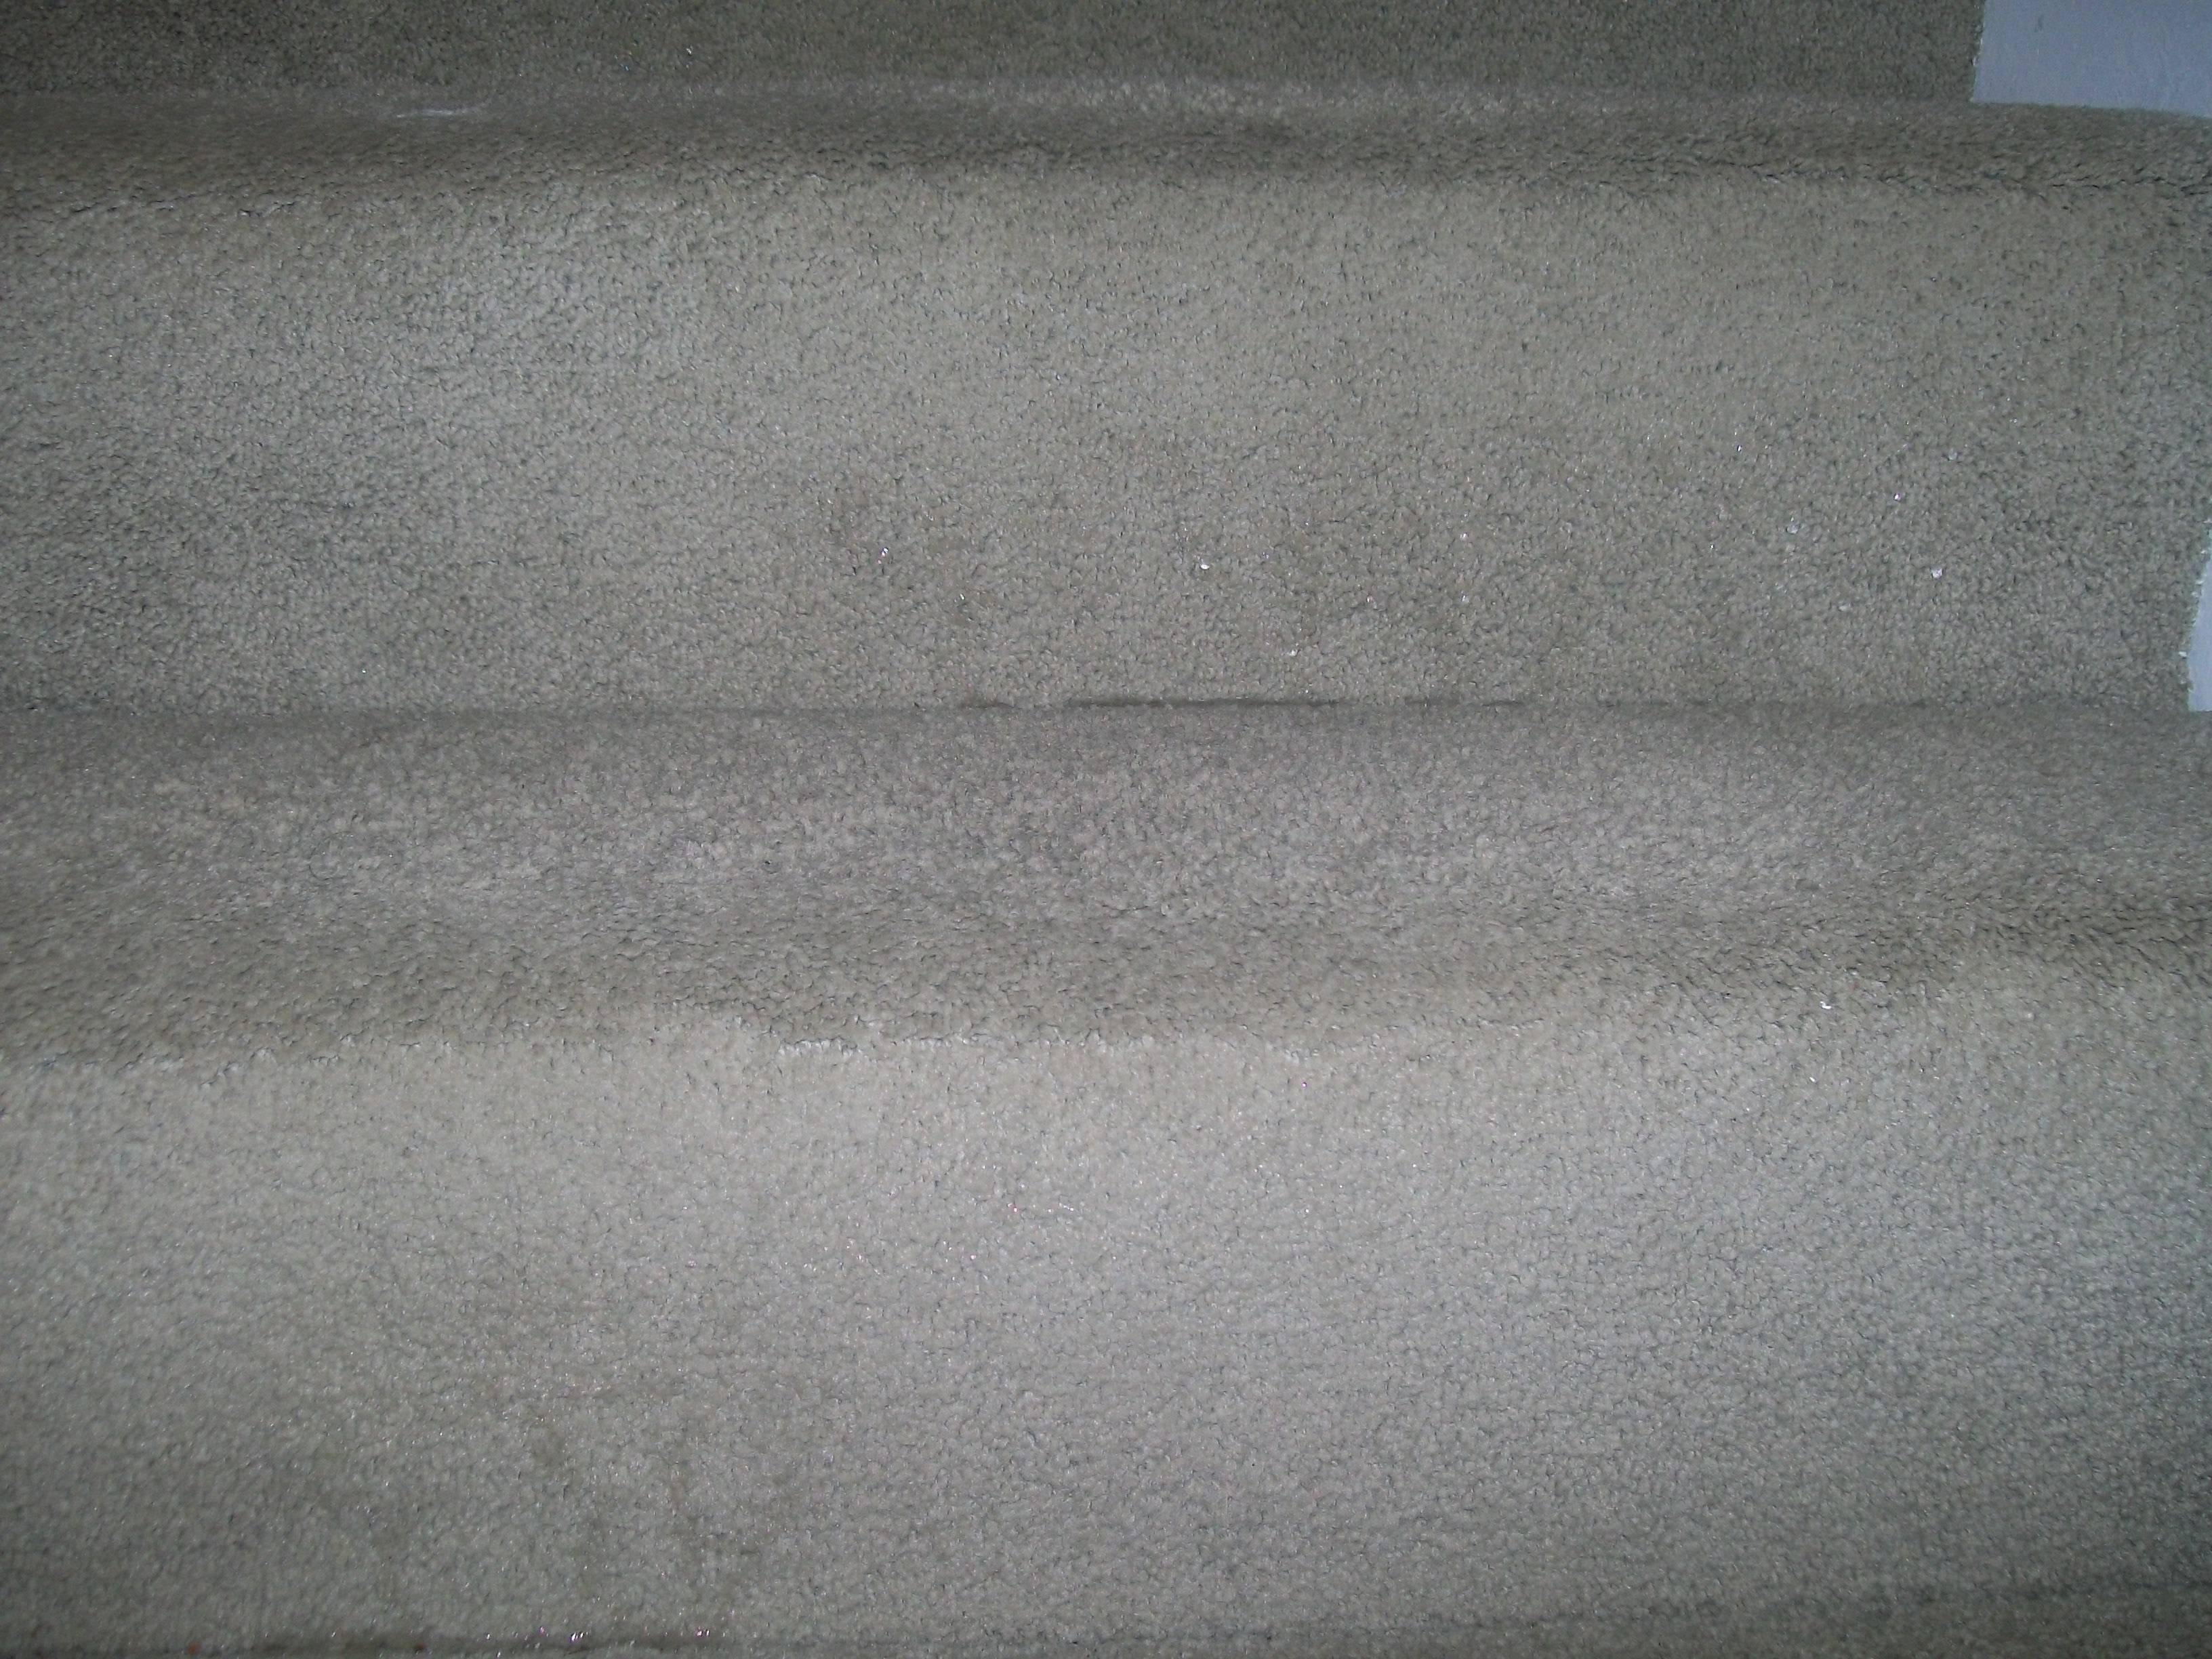 Carpet Stairs After